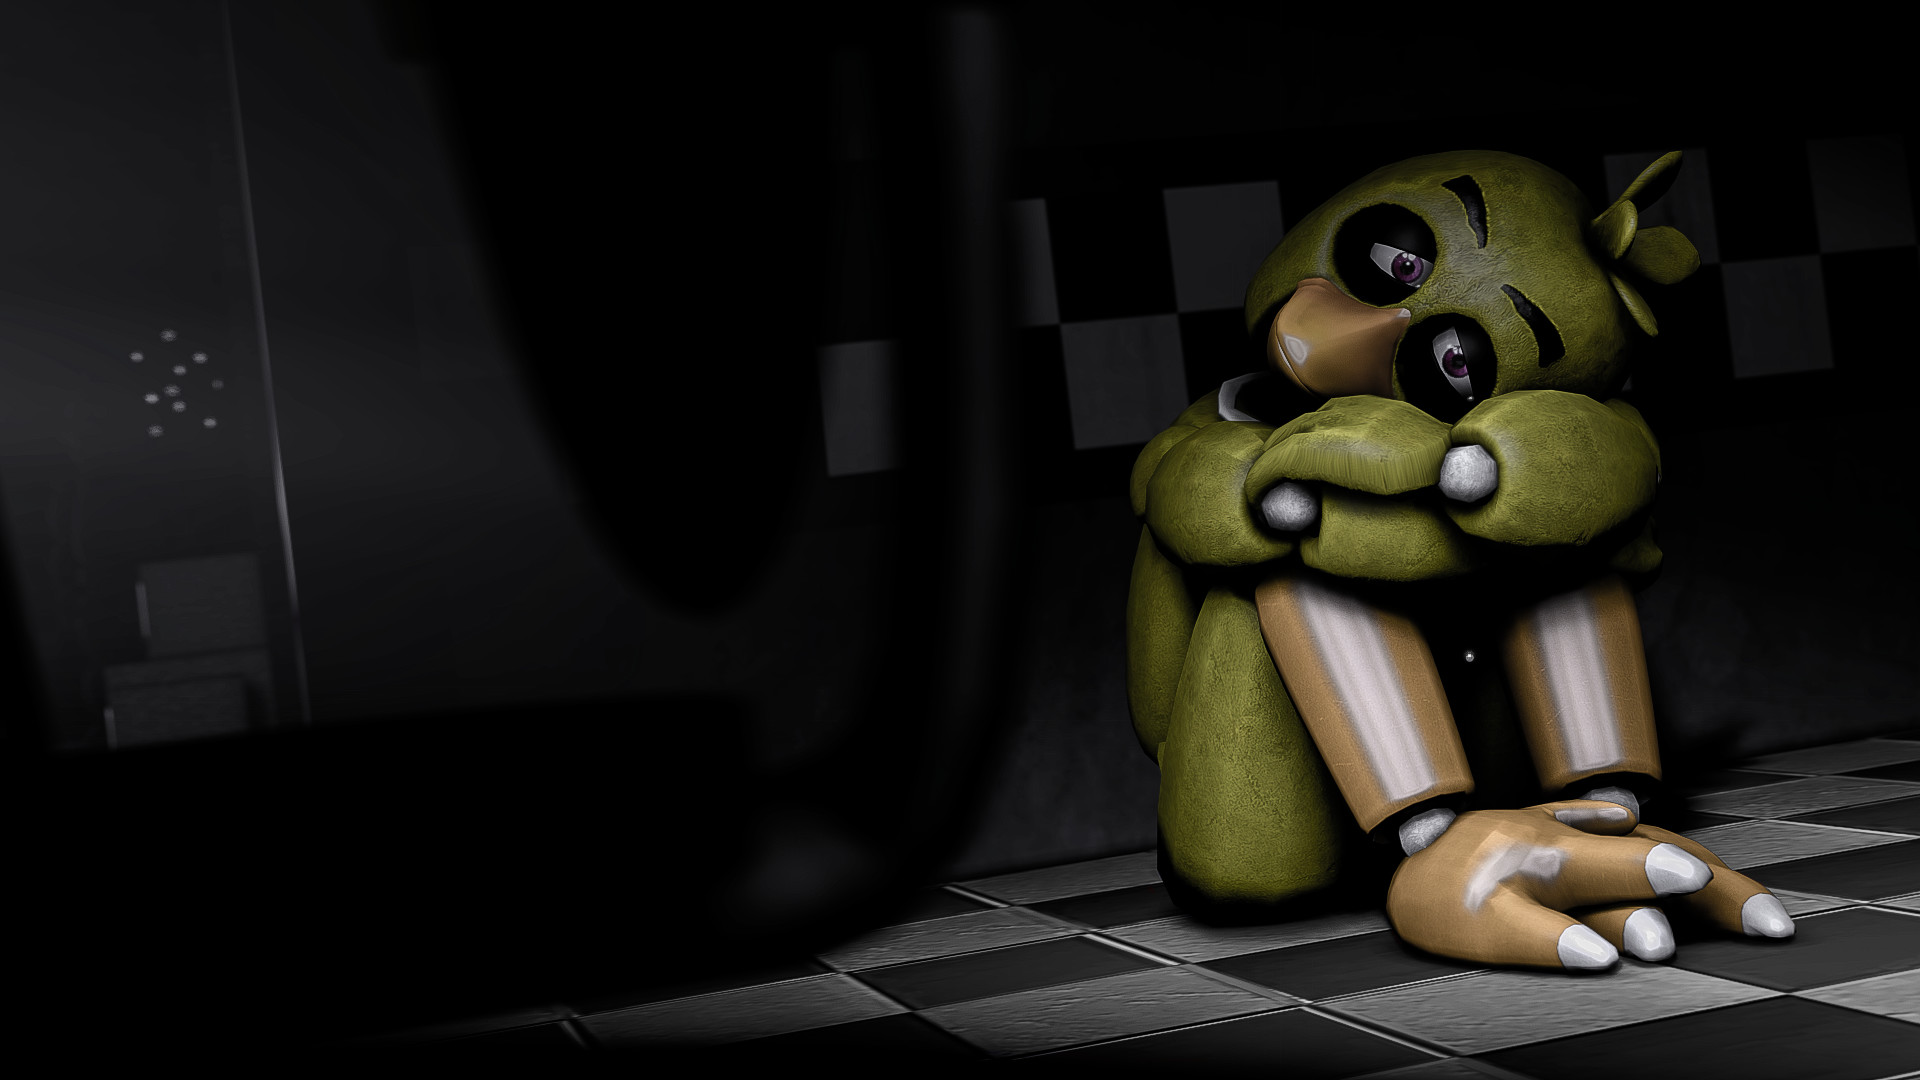 1920x1080 Now I live with regret (SFM Wallpaper) by gold94chica on DeviantArt